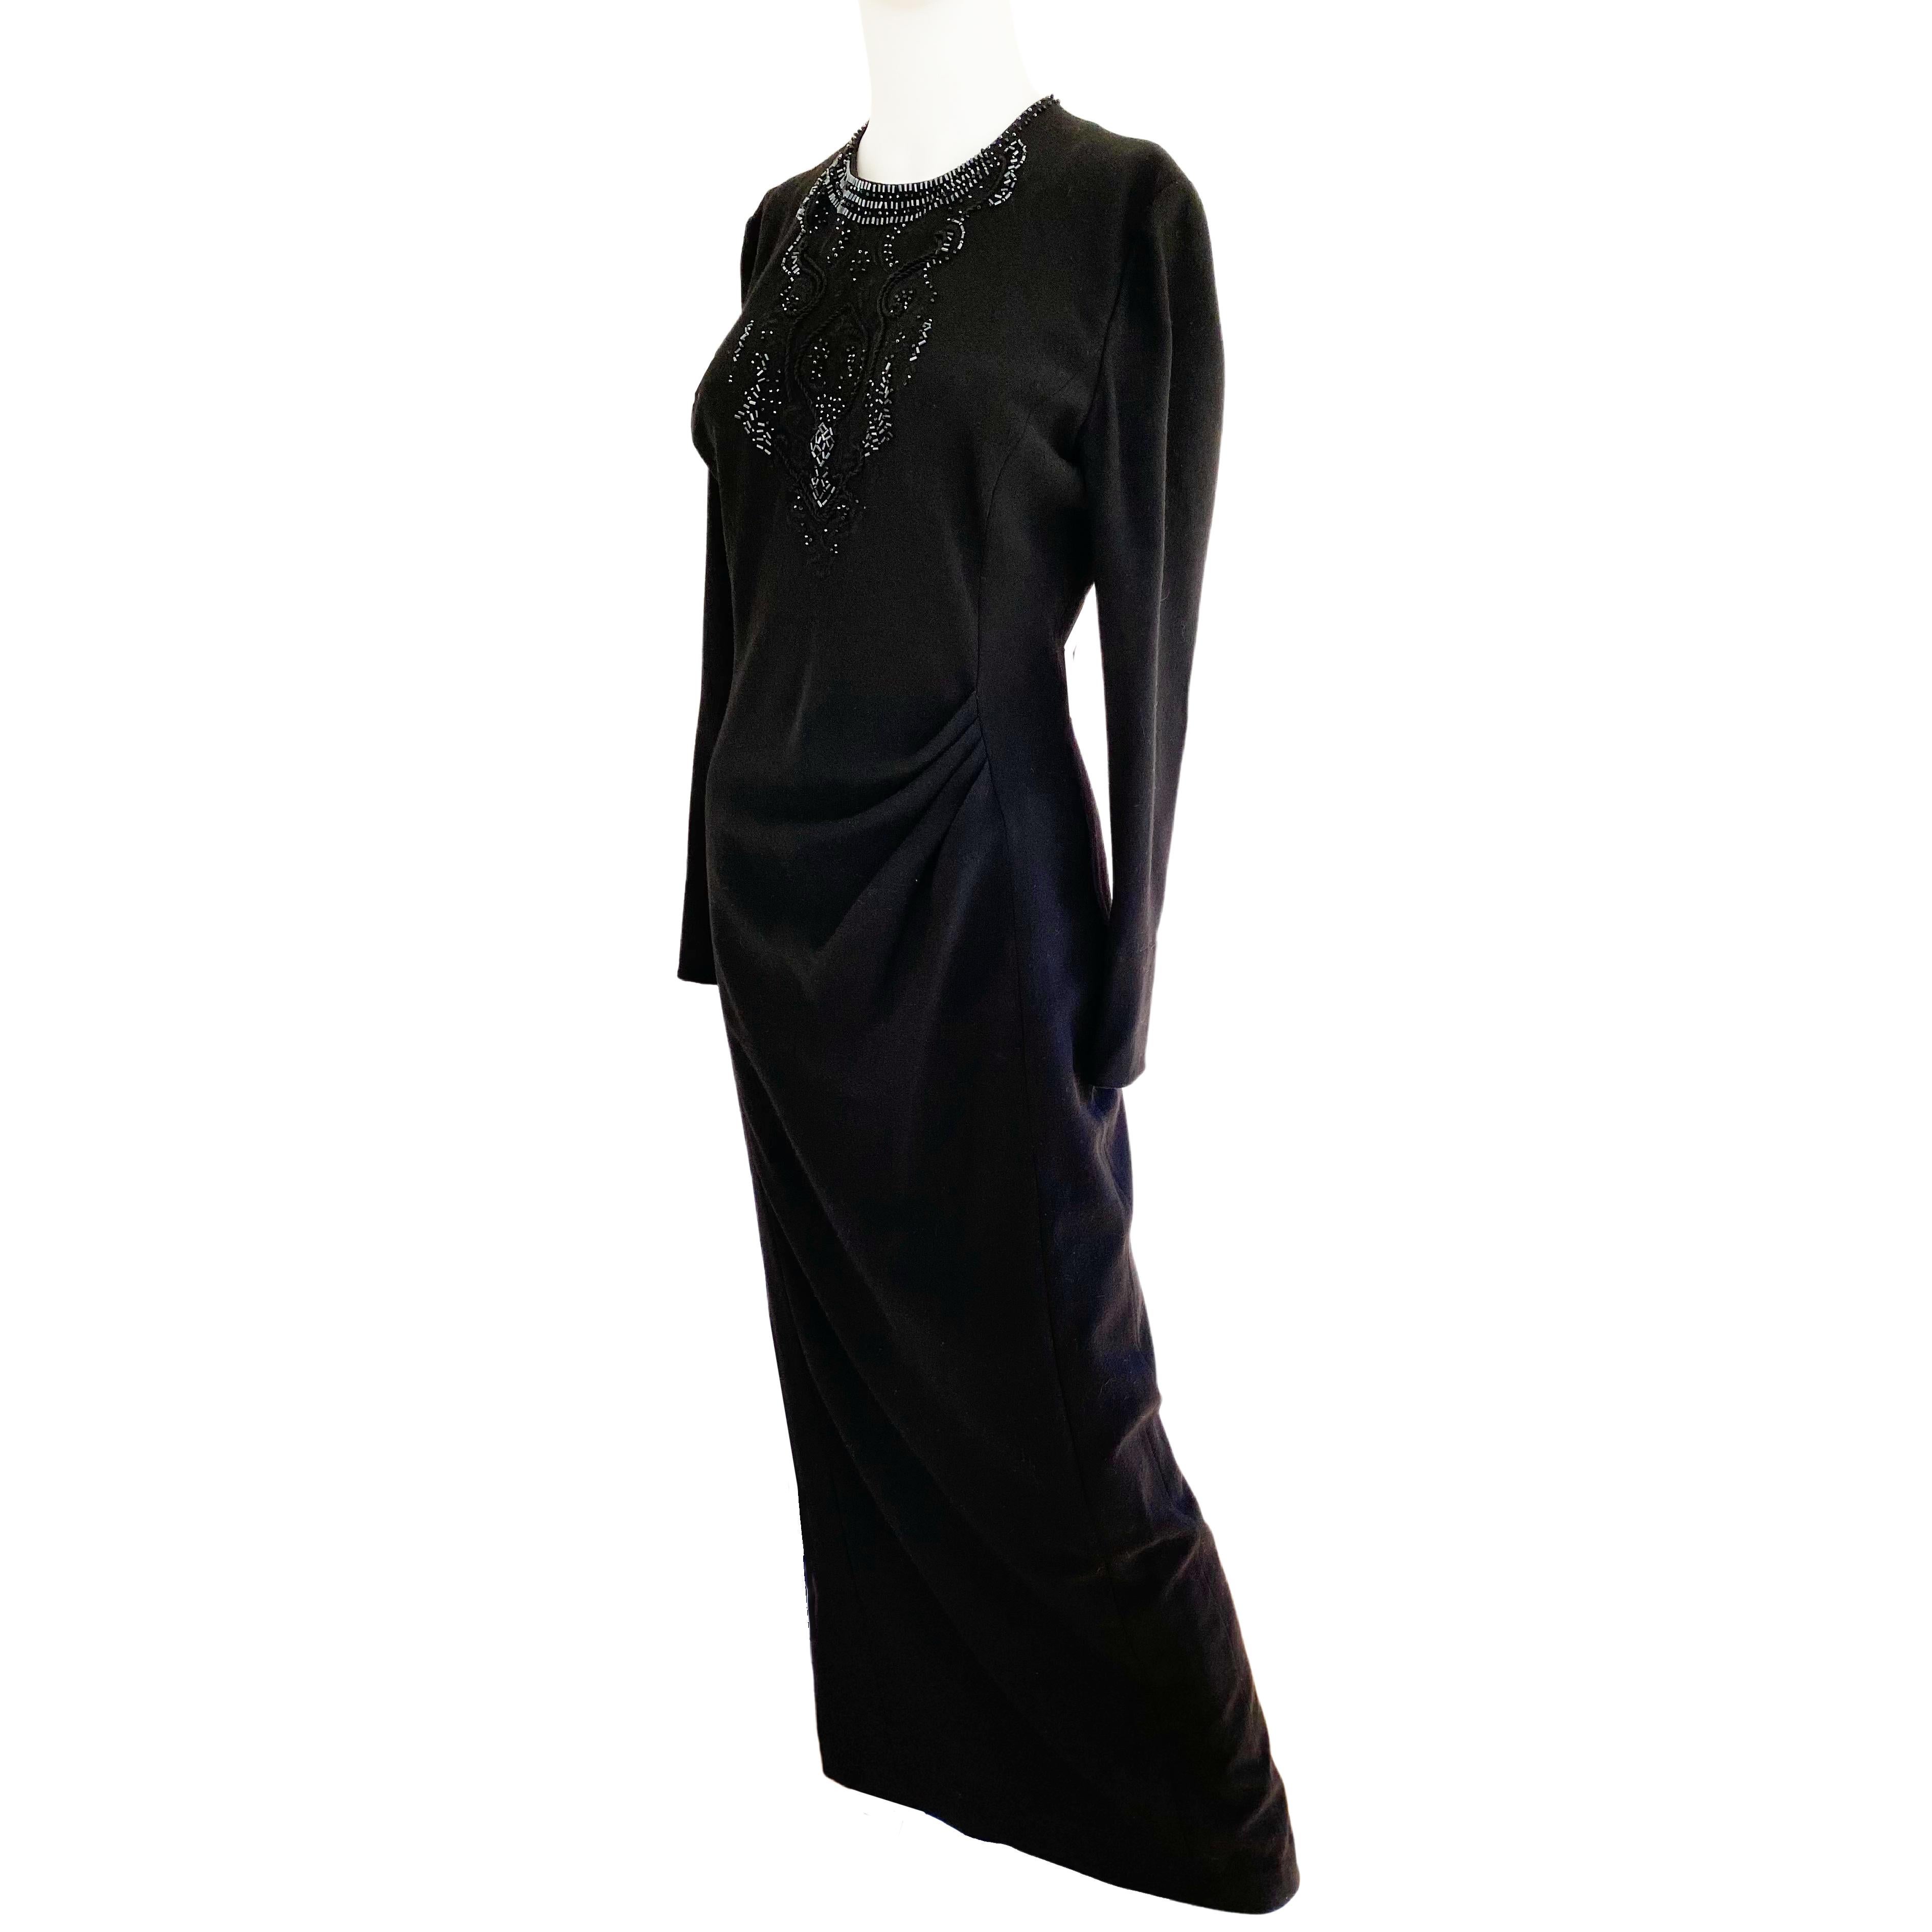 Classy and regal, vintage Emmanuelle Khanh Paris gown.
Condition: No sign of use, if any
Fabric: 100% worsted wool, completed lined 
Construction: Tailored precision in fit. Buttons at sleeve end. 
Embellishments: Intricate beading
Circa: estimated